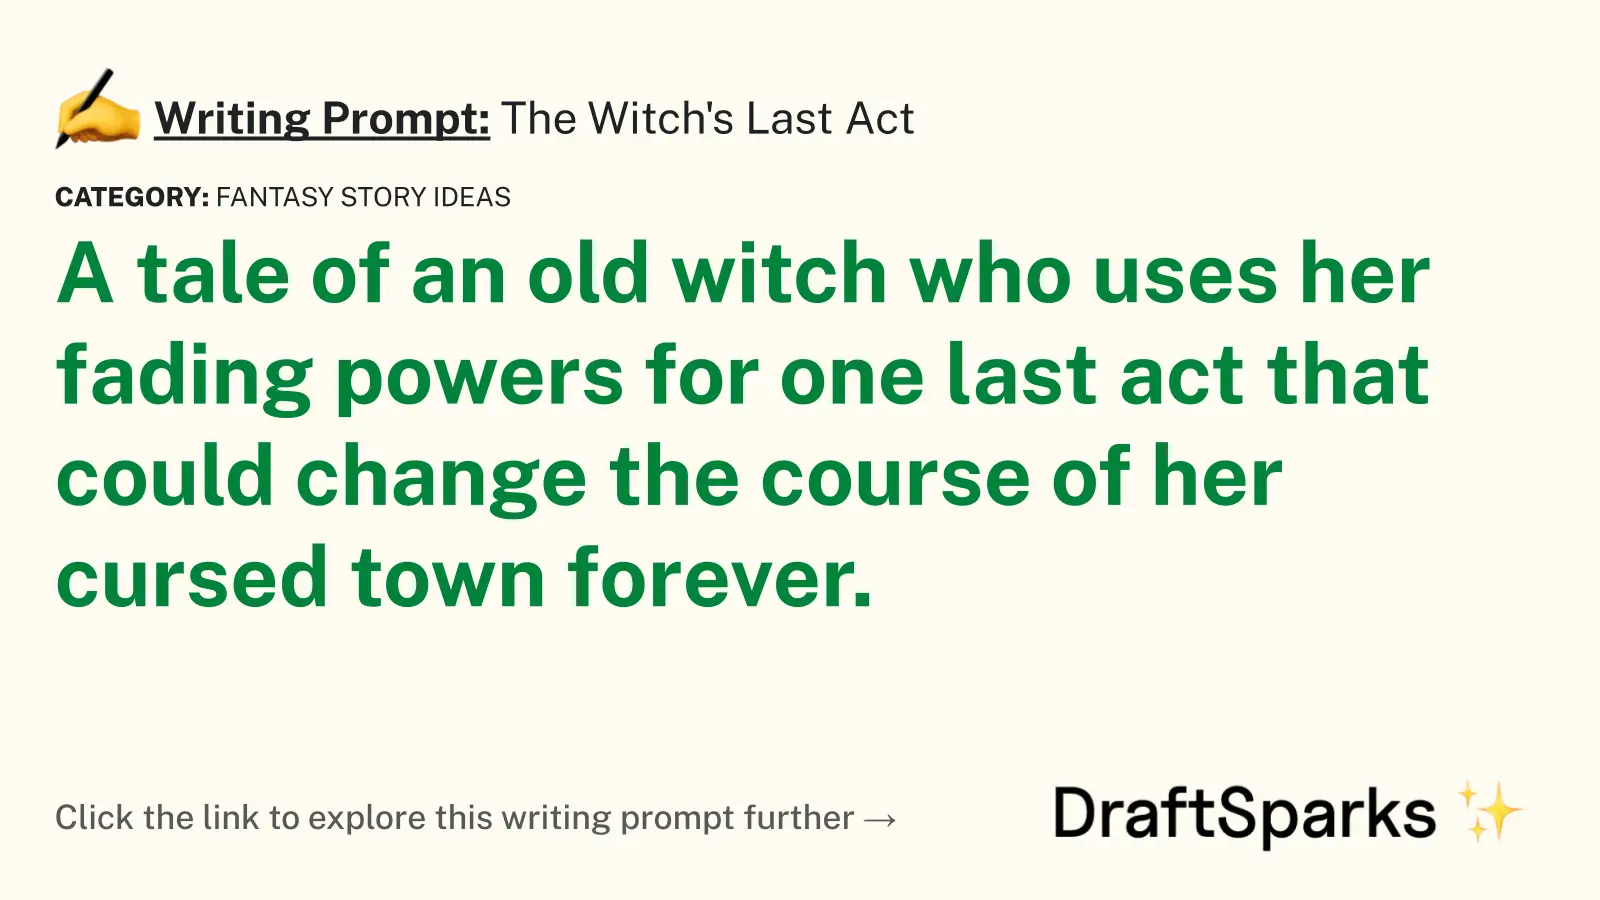 The Witch’s Last Act